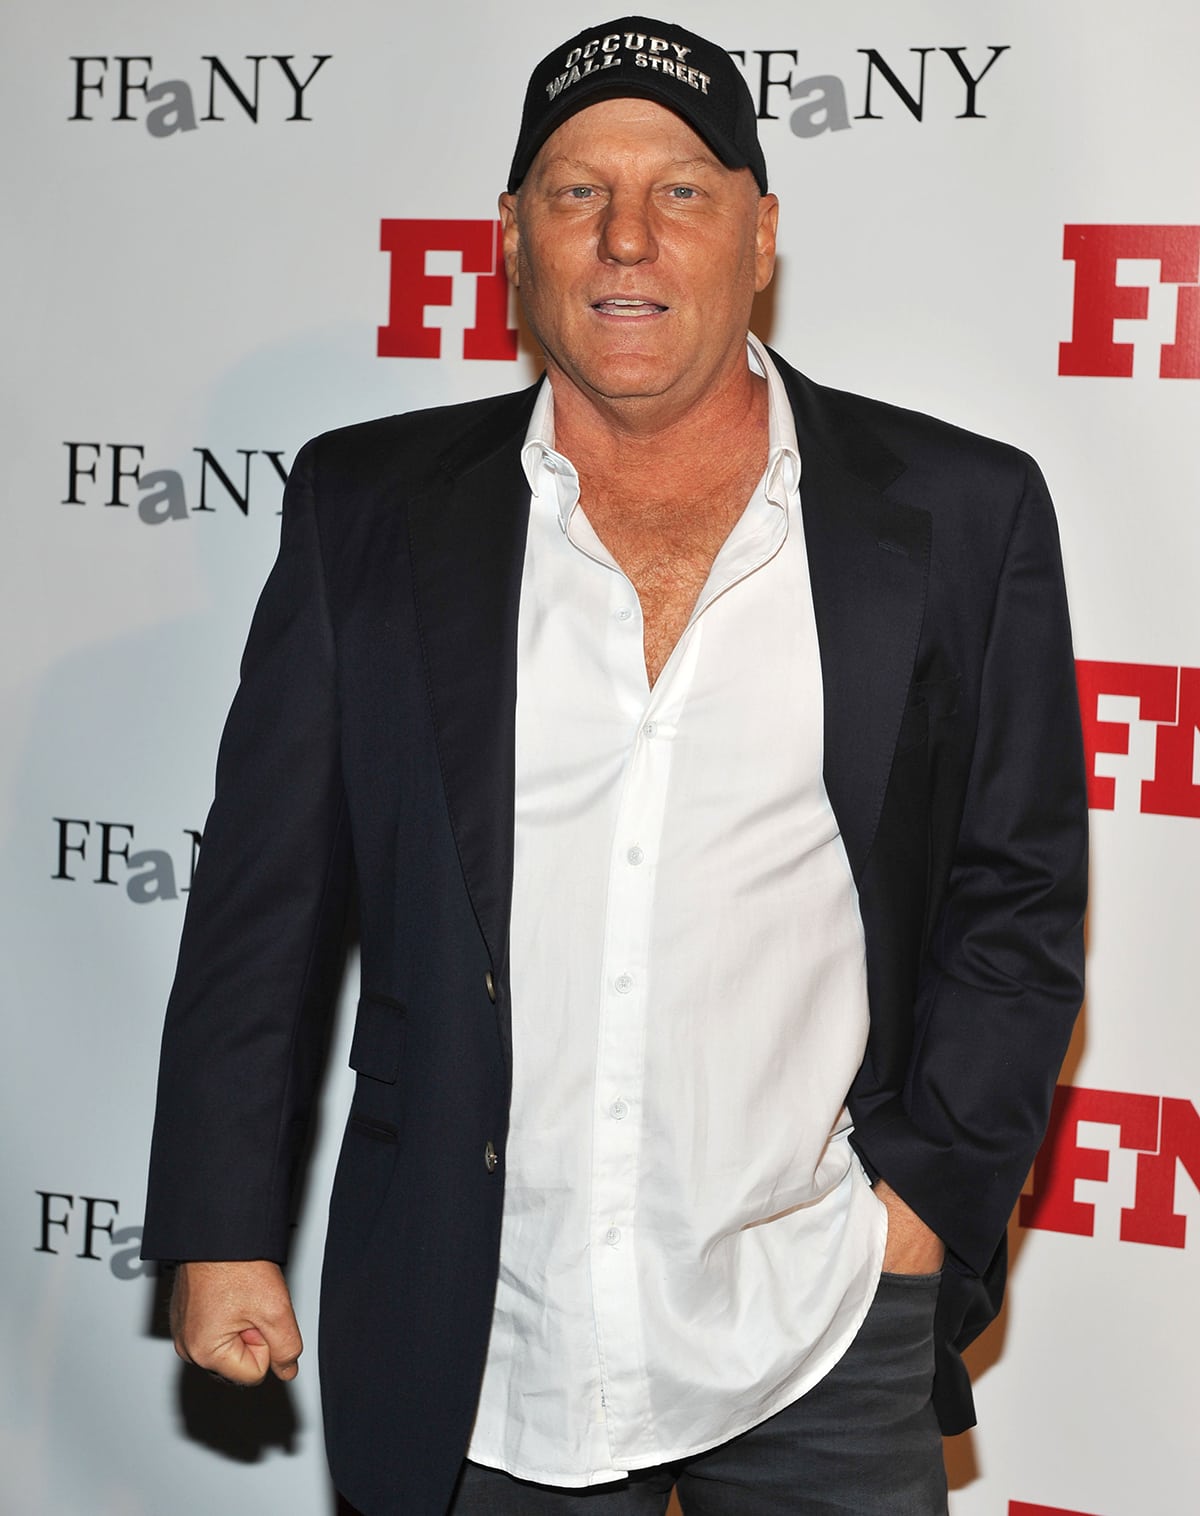 Steve Madden, the company's founder, remains its chief creative officer and head of design